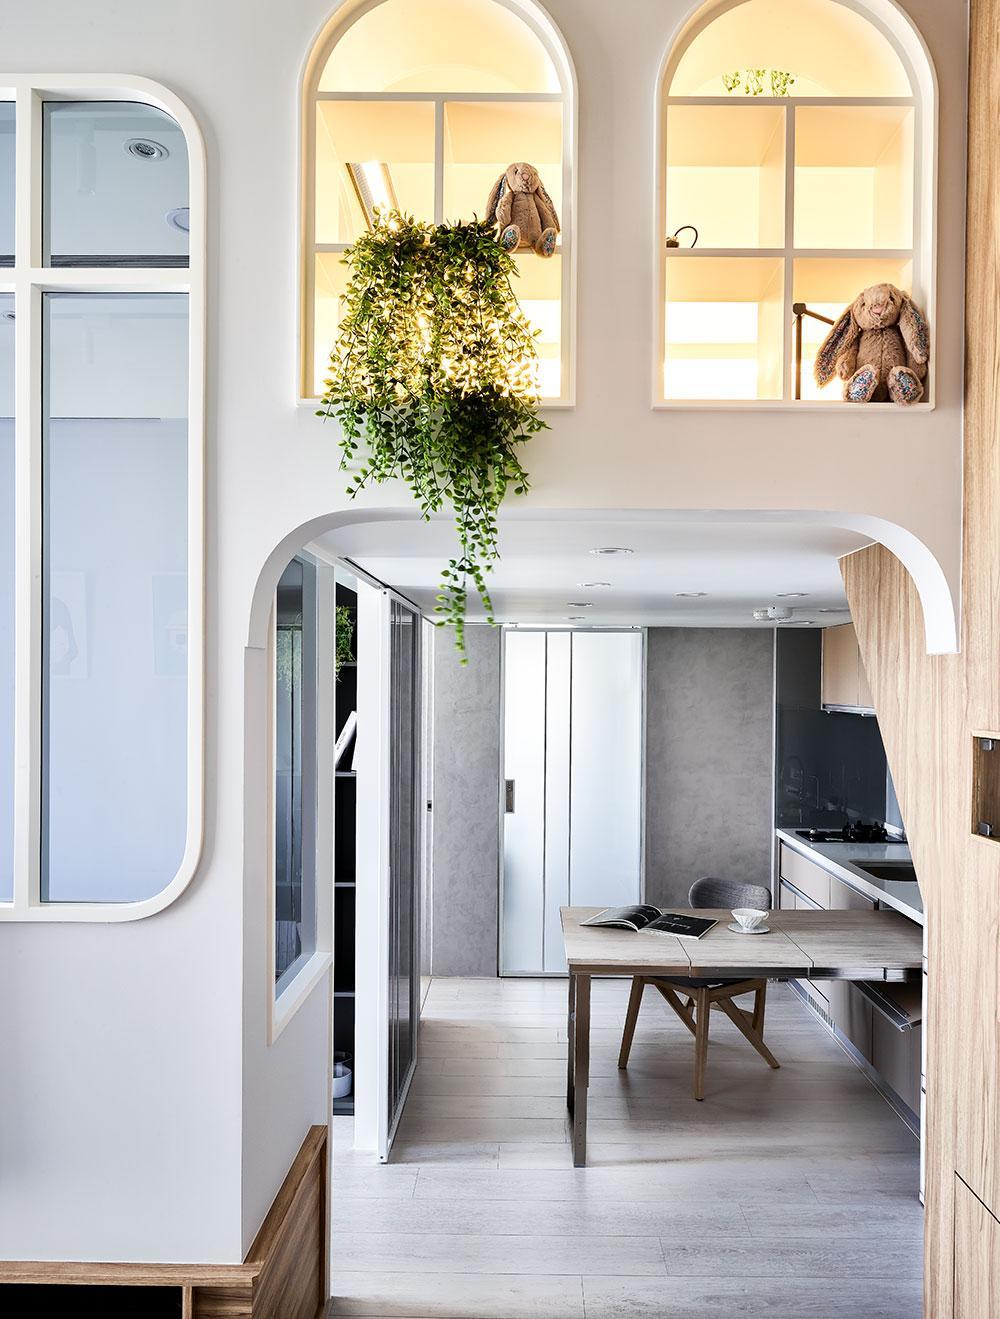 A 463sqft Space in Taipei Transformed into A Gentle Nordic Treehouse